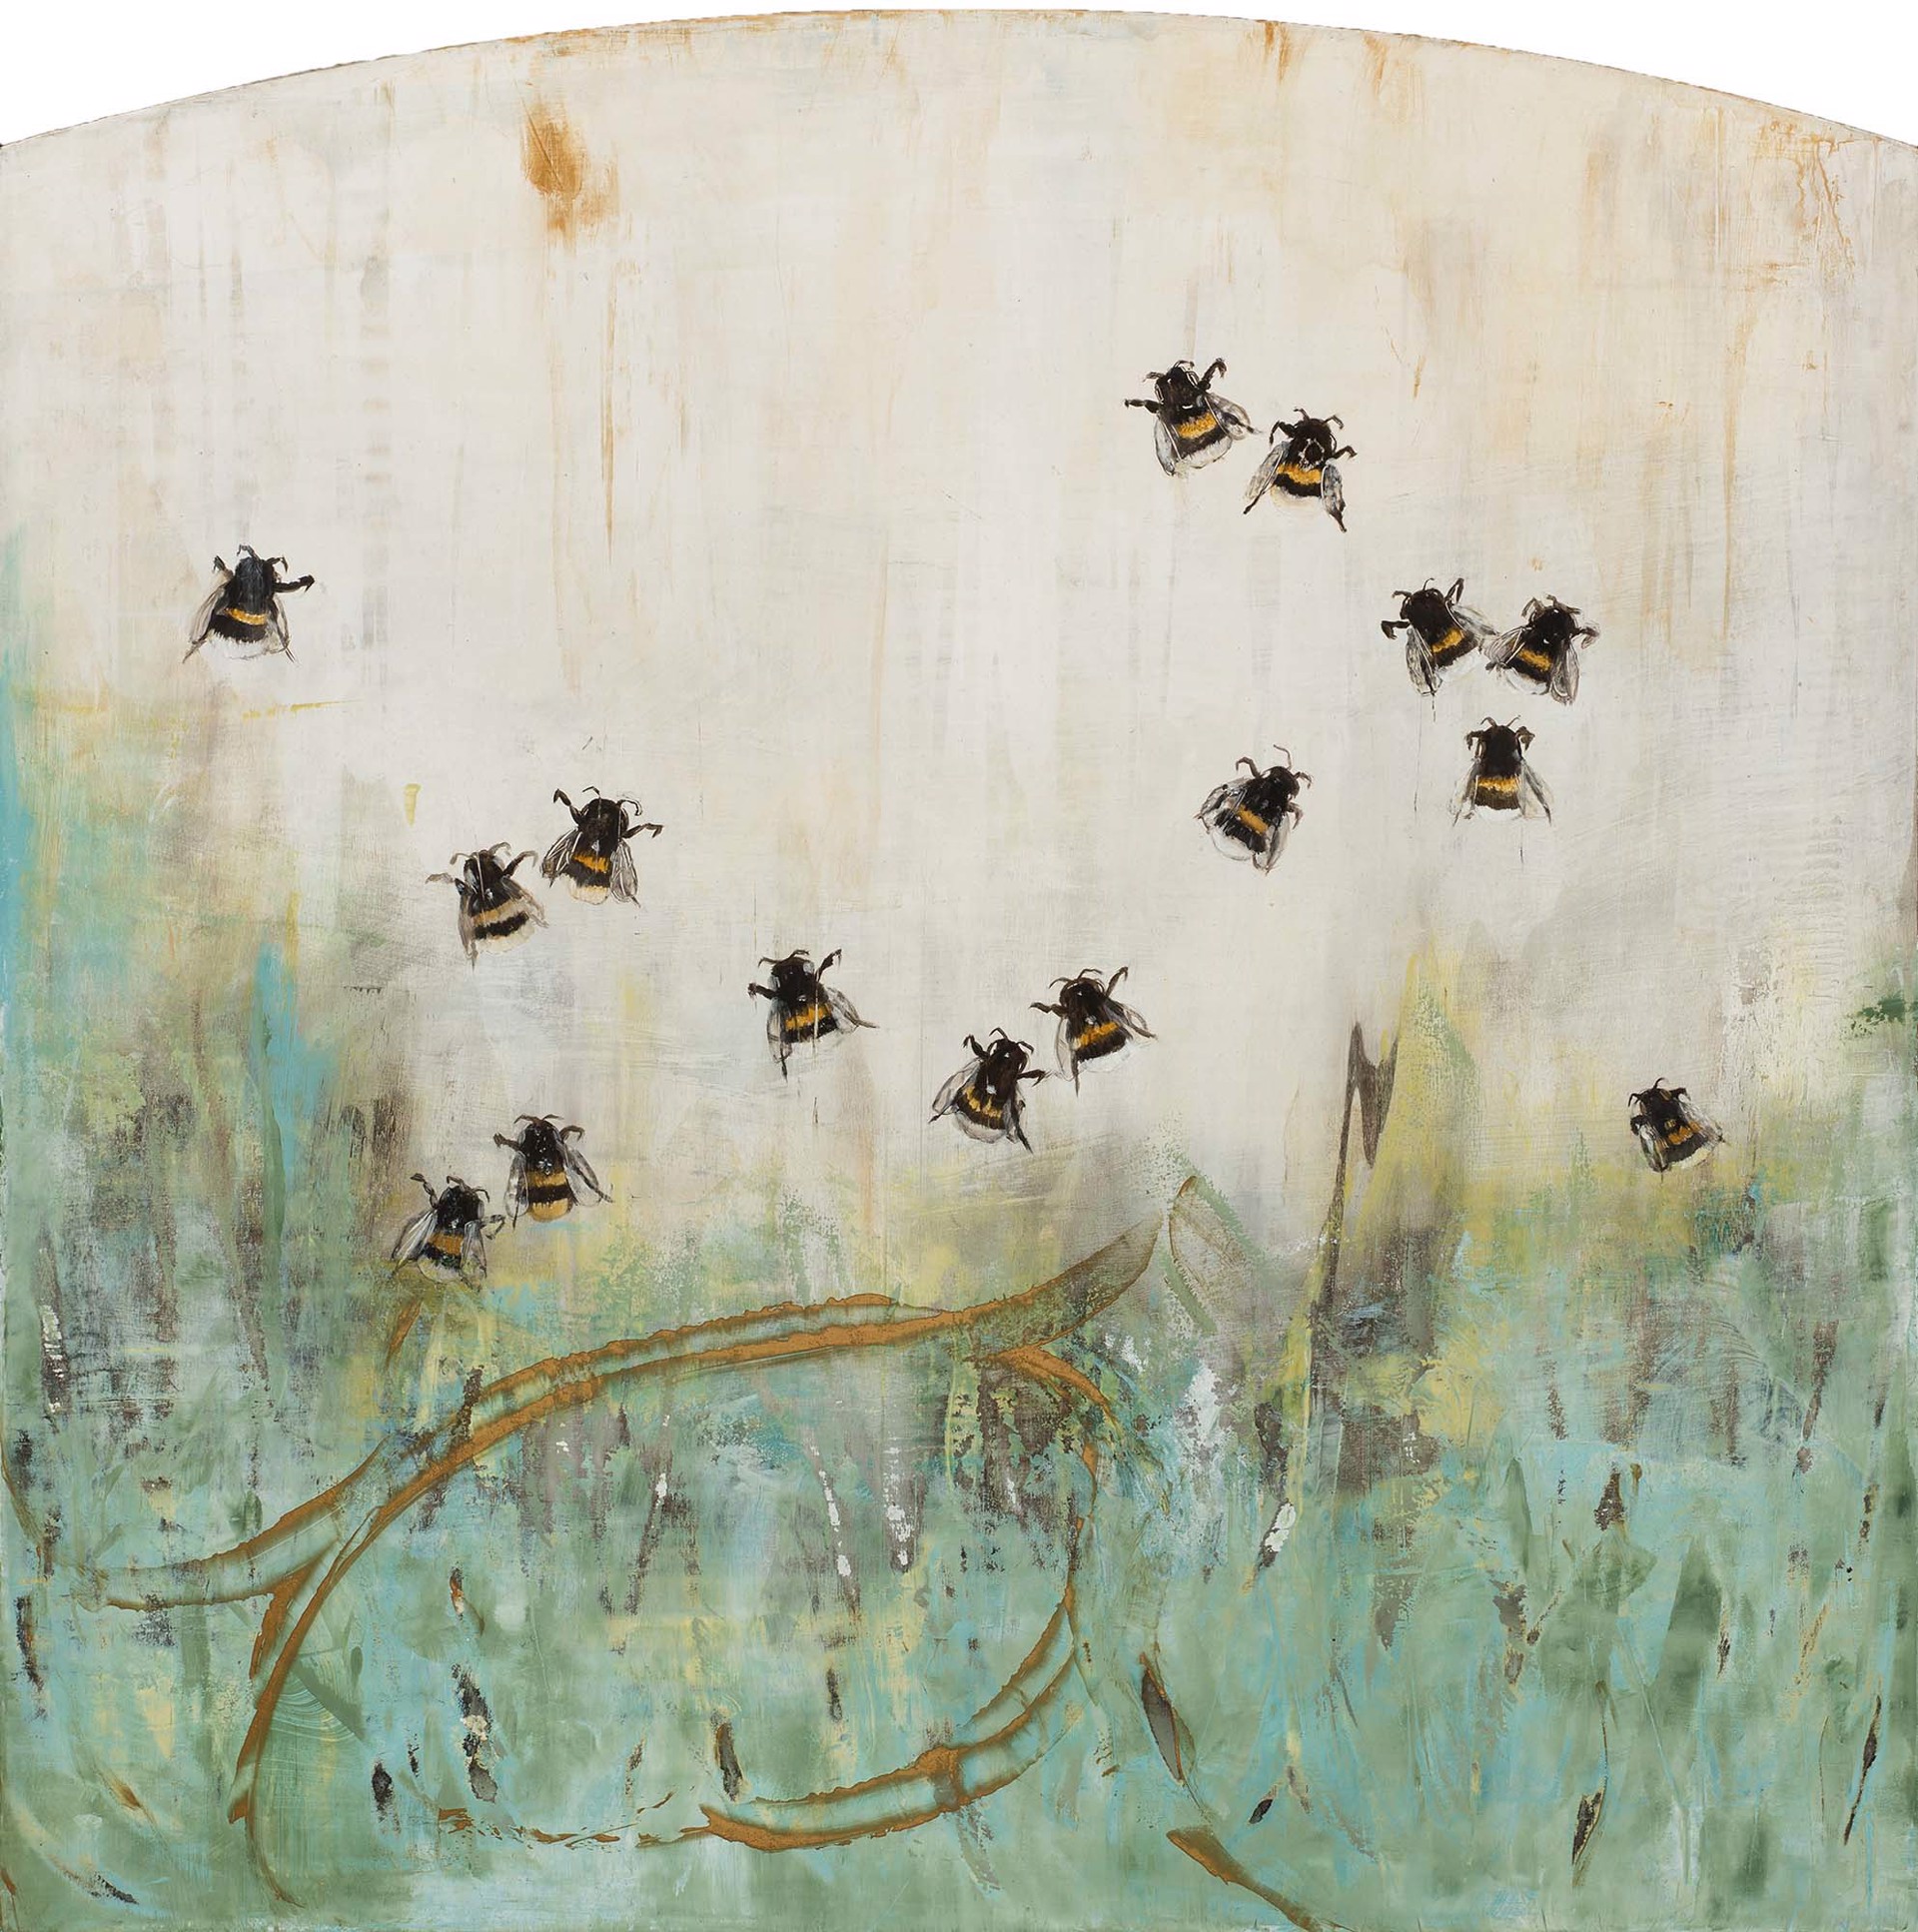 A Contemporary Painting Of A Group Of Bumblebees With An Abstract Background By Jenna Von Benedikt Available At Gallery Wild